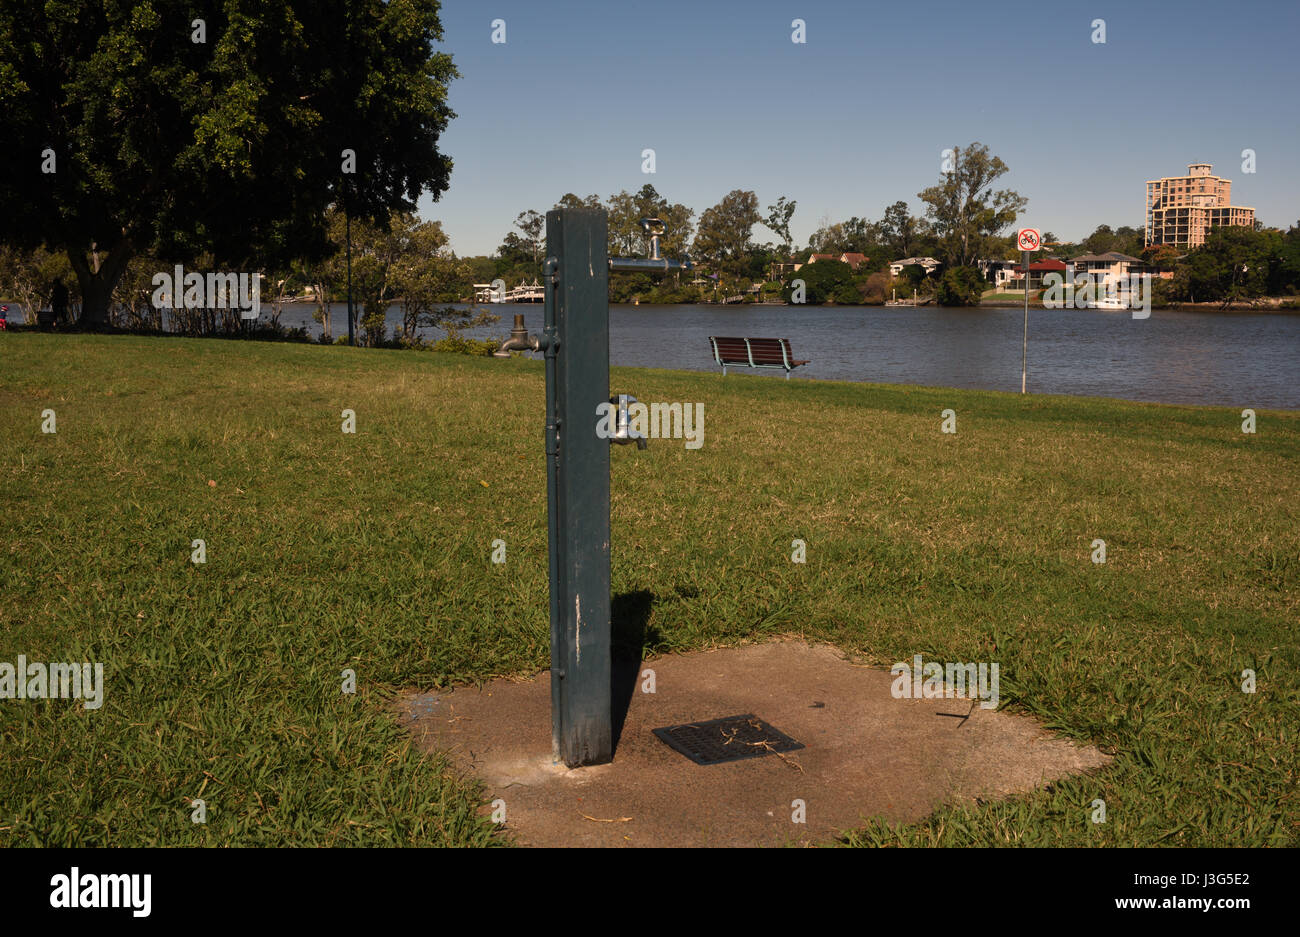 Brisbane, Australia: Water tap and standpipe on post in park Stock Photo